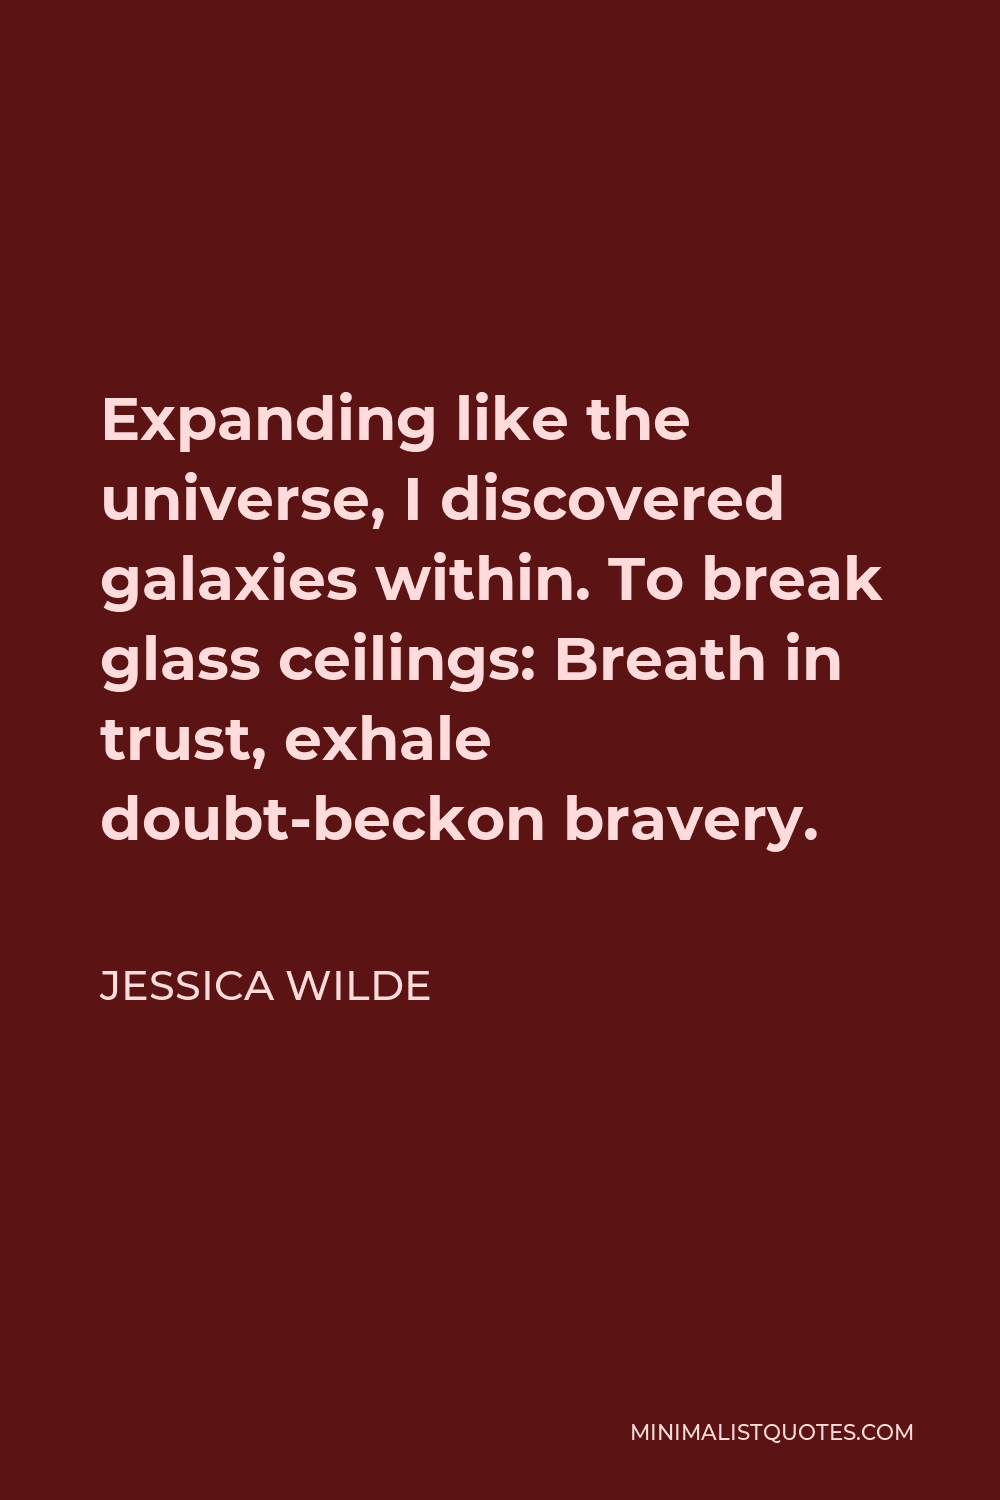 Jessica Wilde Quote - Expanding like the universe, I discovered galaxies within. To break glass ceilings: Breath in trust, exhale doubt-beckon bravery.